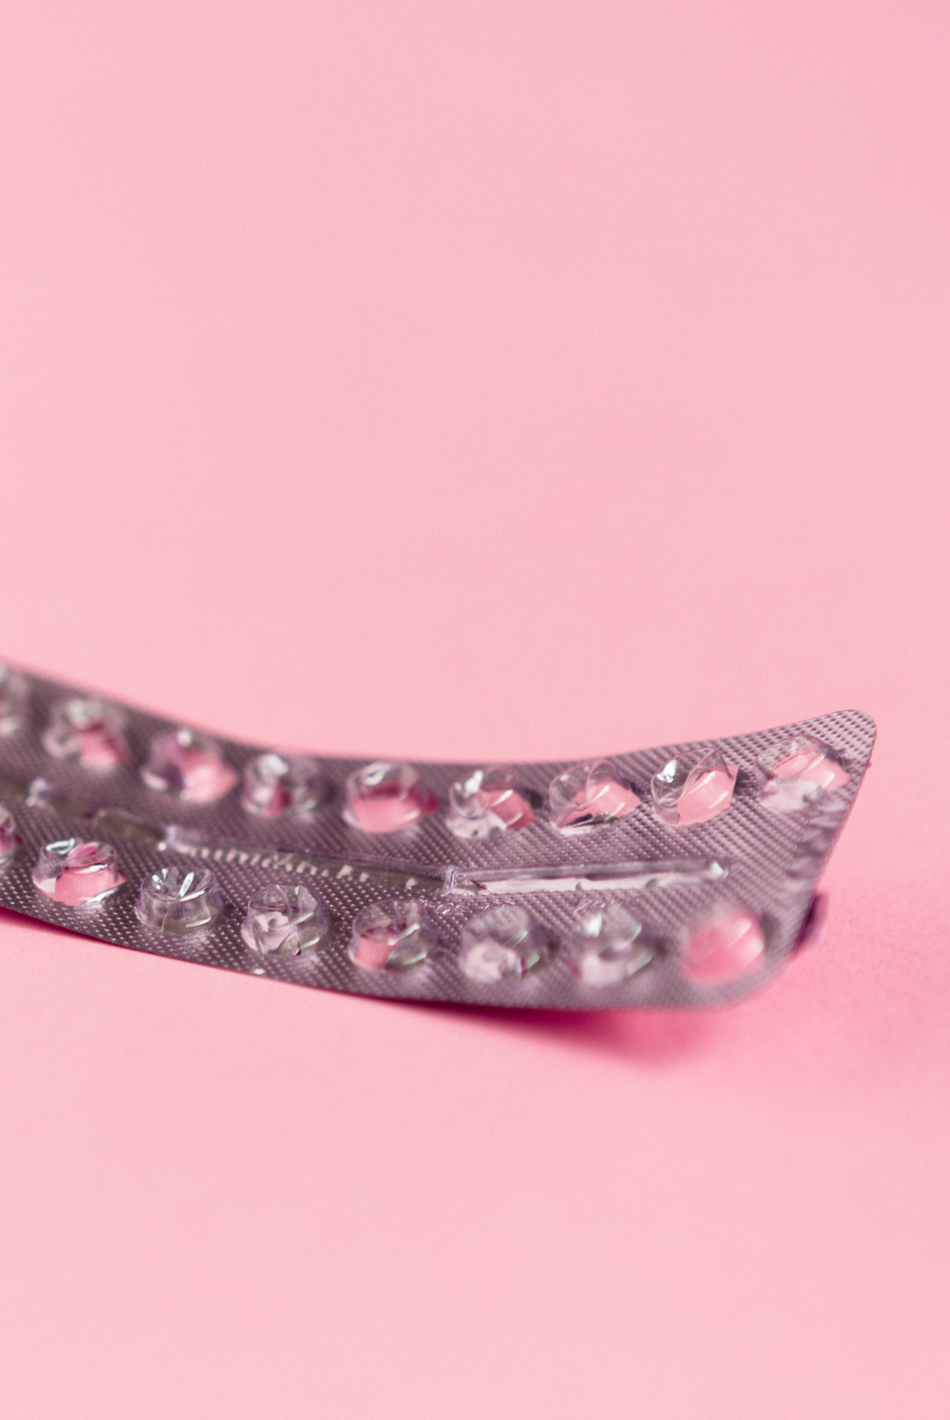 Hormonal Birth Control and the Risk of Breast Cancer